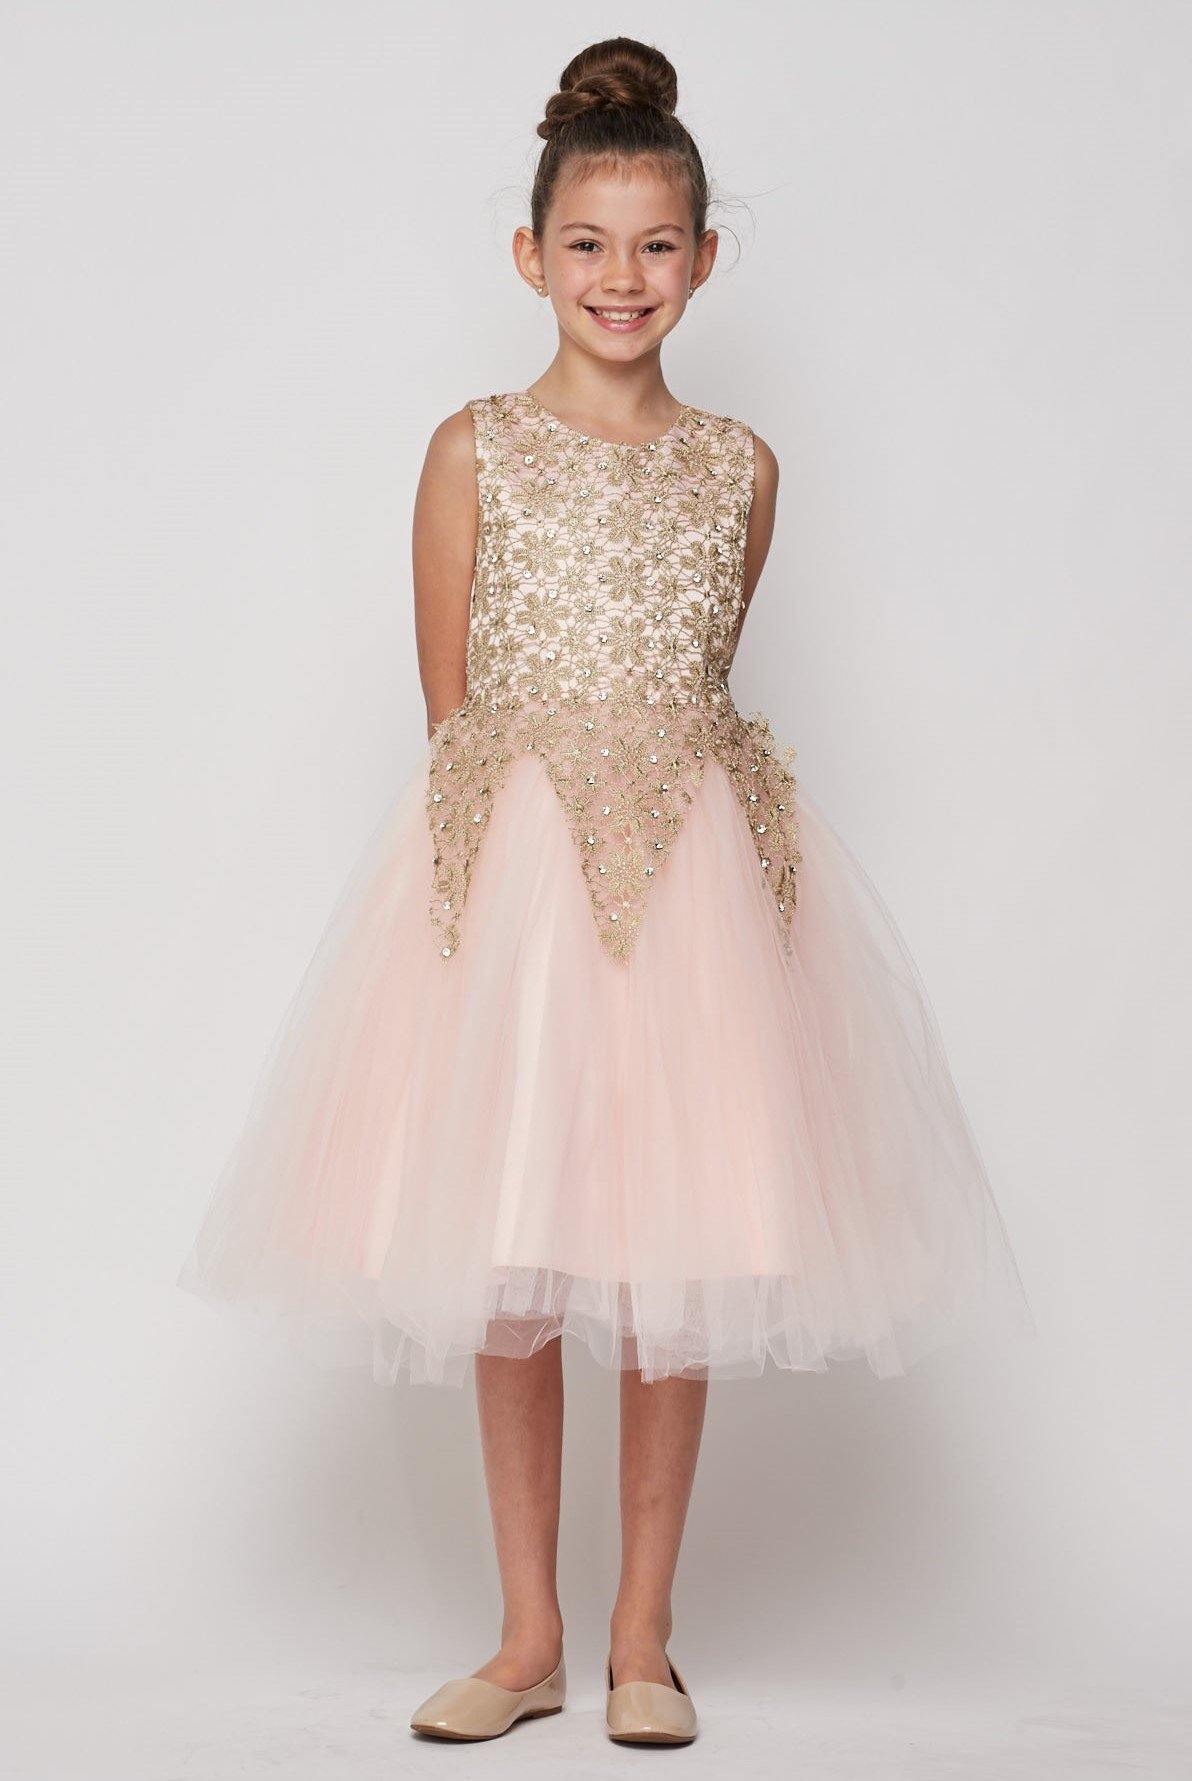 Short Gold Embroidered Gown Flower Girls Dress - The Dress Outlet Cinderella Couture